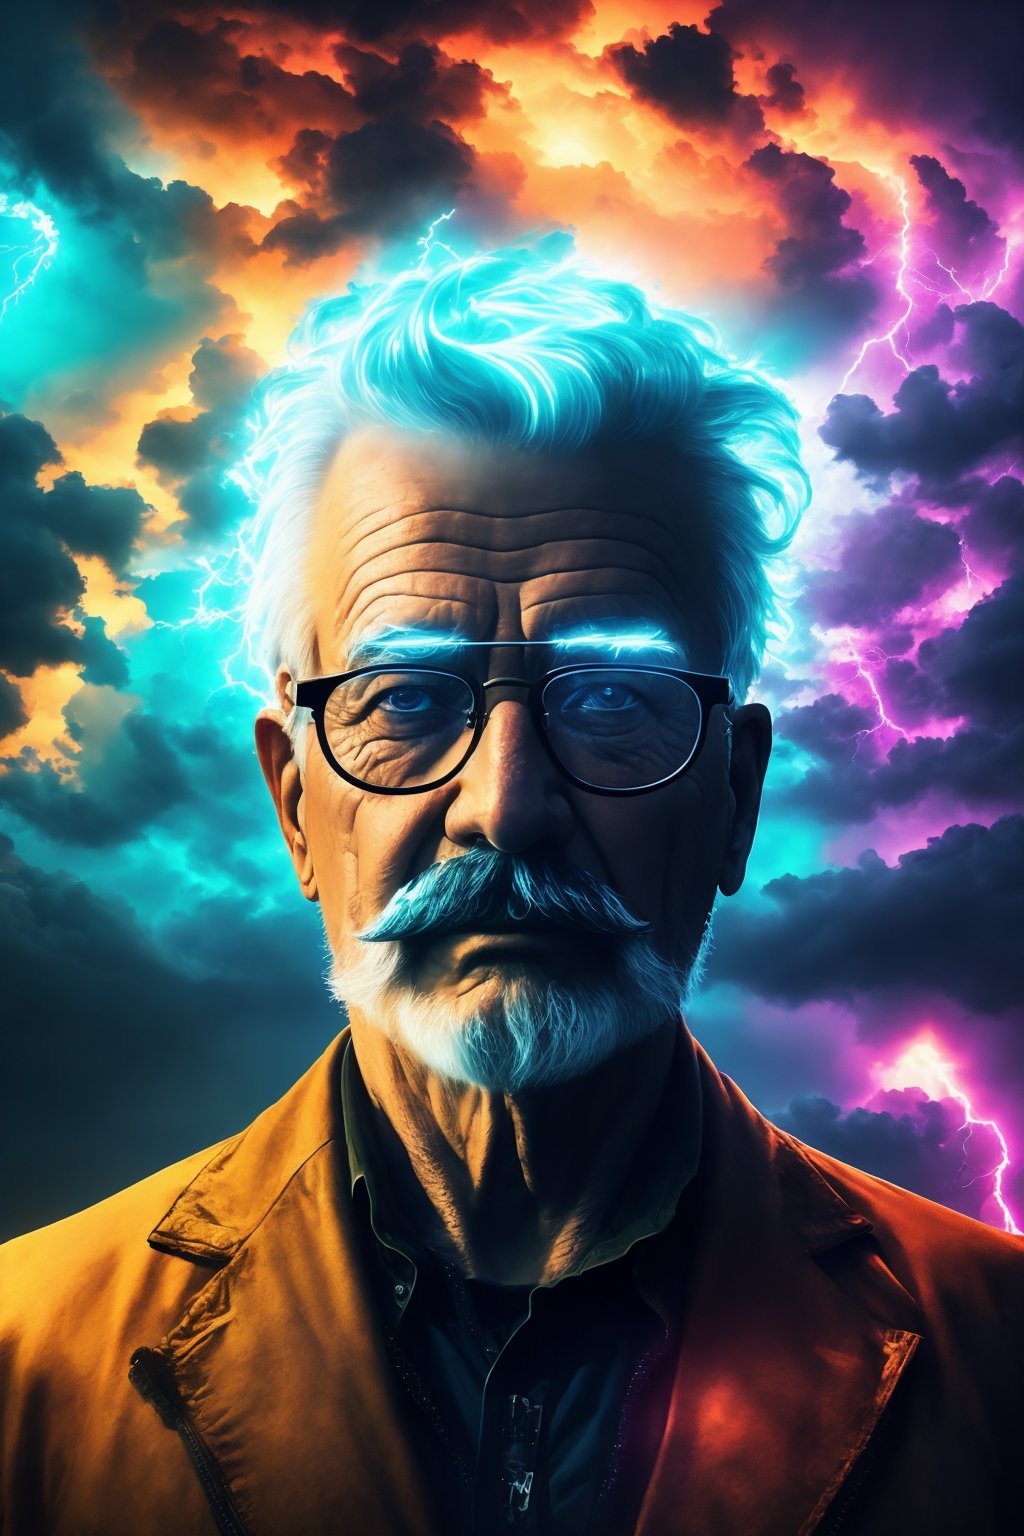 lightning strikes, abstract, high quality, UHD, Luminous Studio graphics engine, violet, cyan, octane render, cloudy haze, fiery members, old man Carl Gustav Jung with glasses and mustache portrait